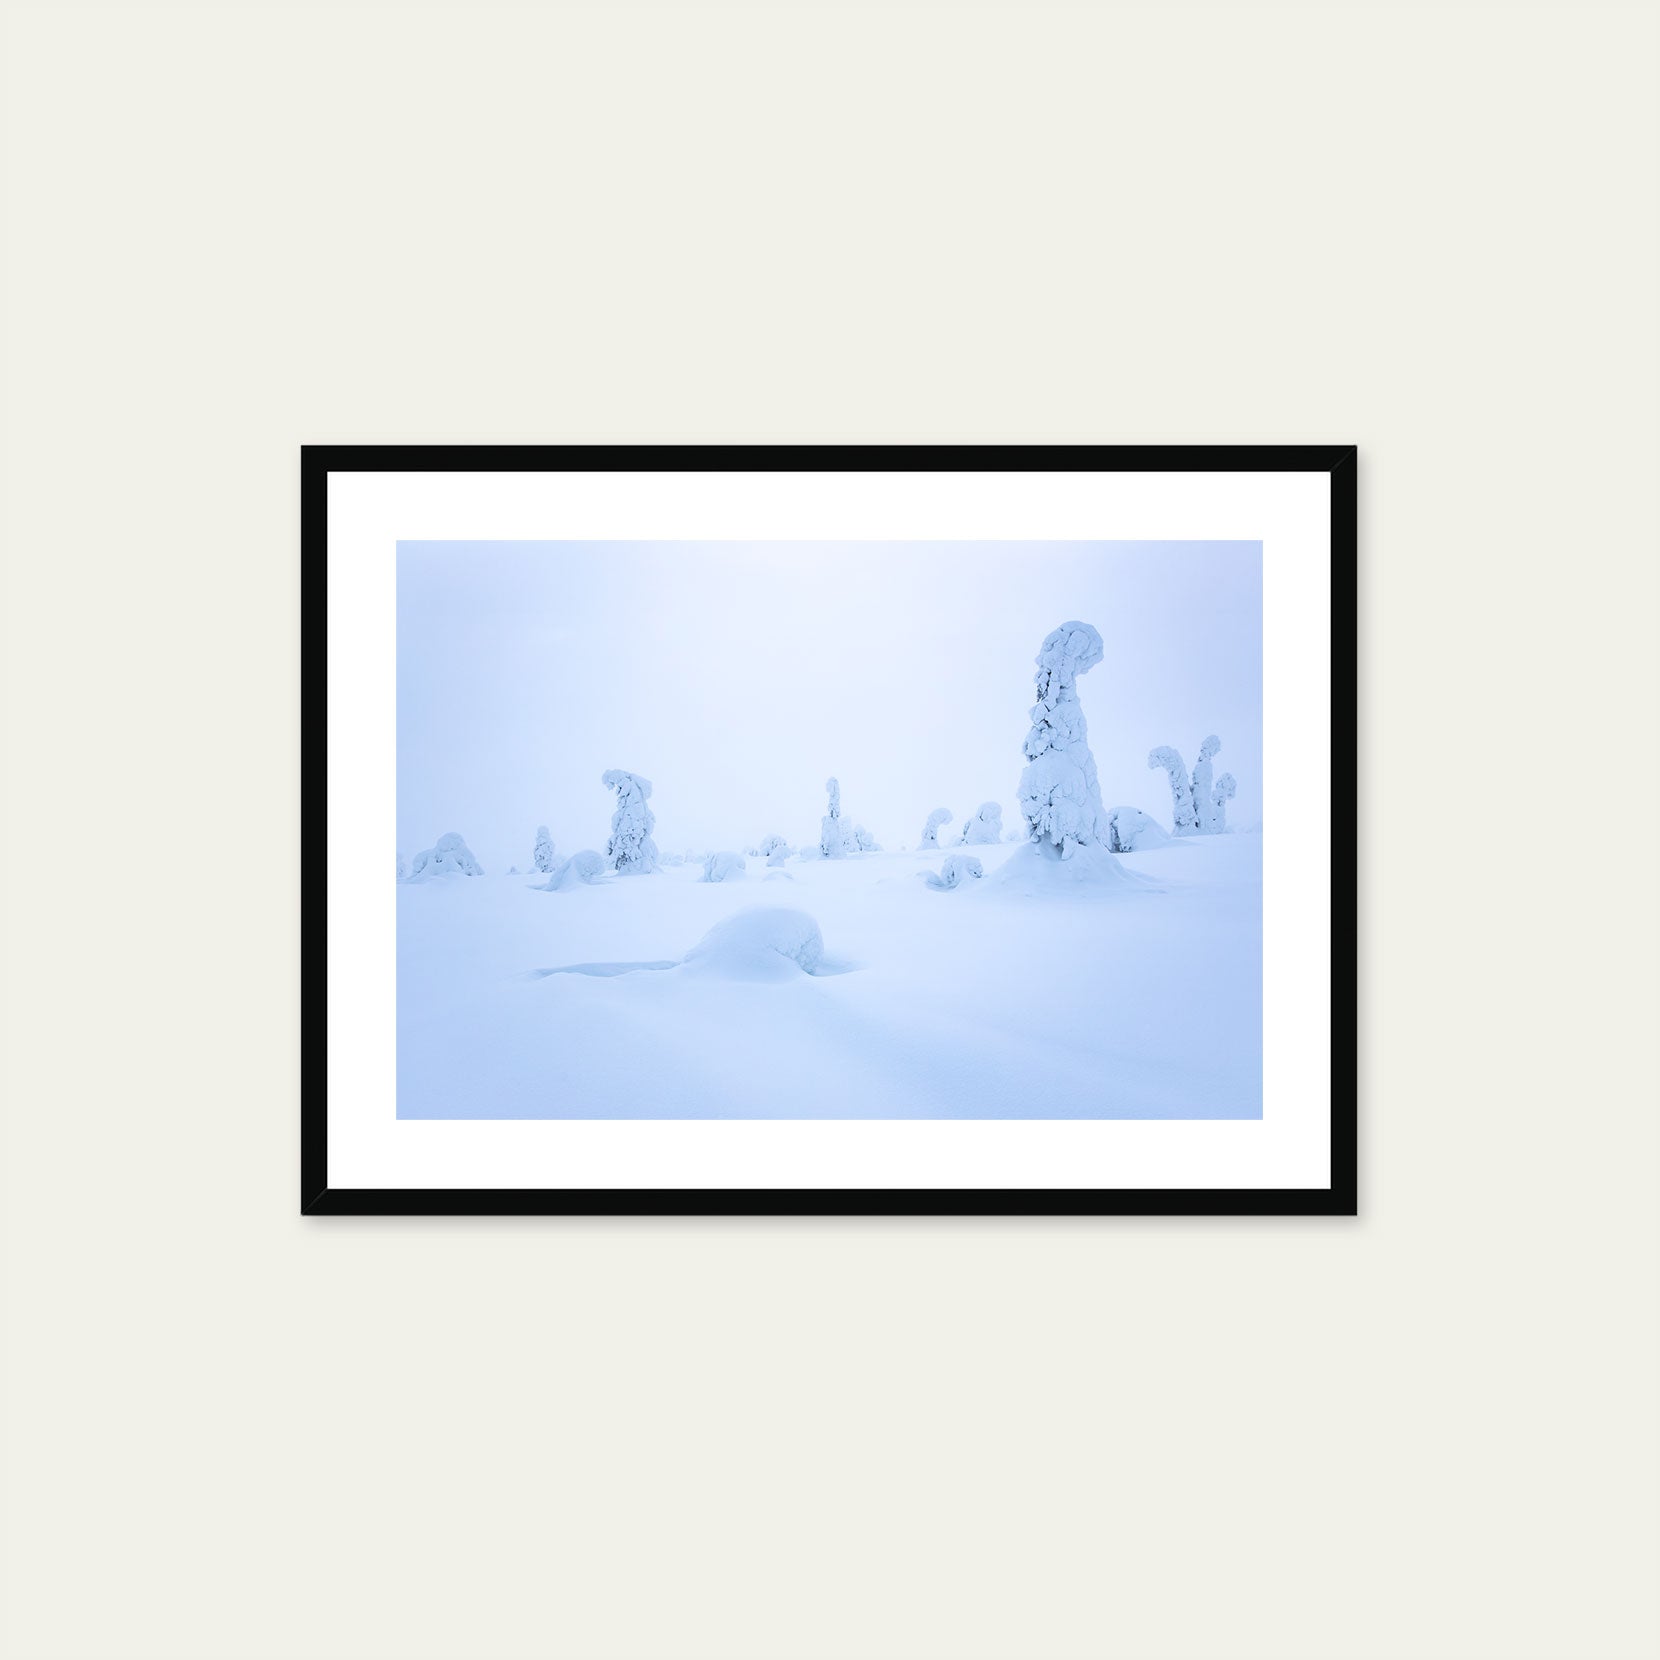 A black framed print of snow covered trees